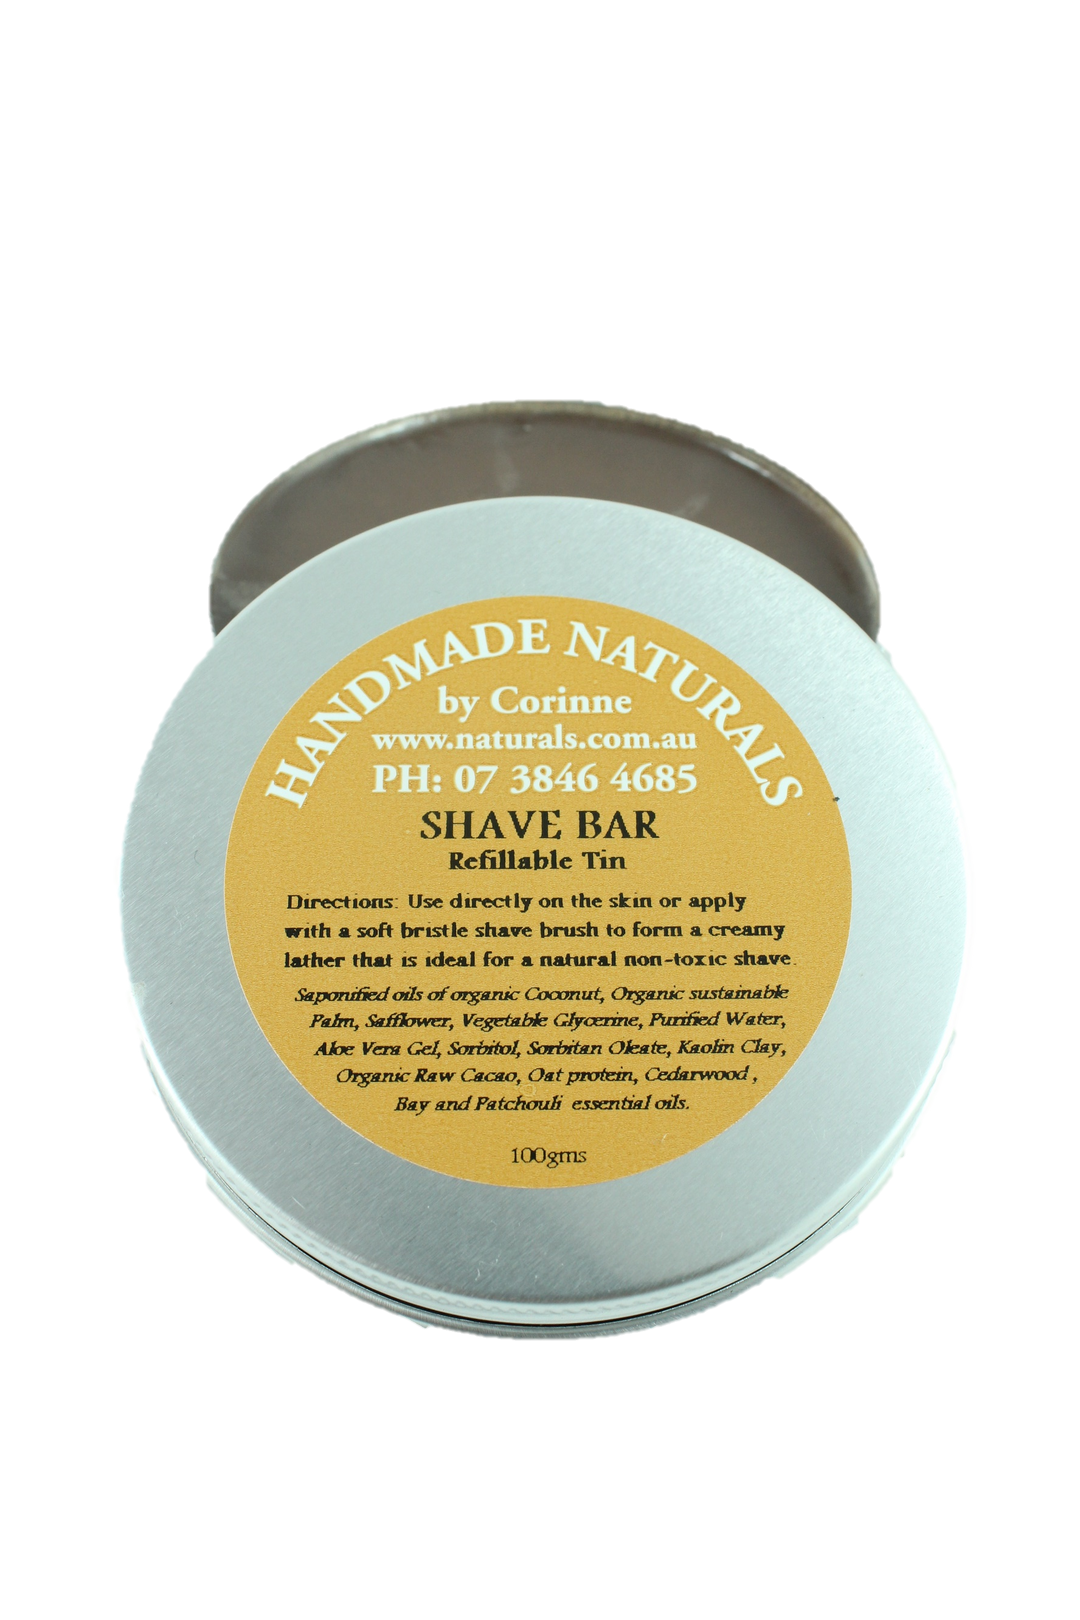 Shave Bar REFILLABLE from Handmade Naturals